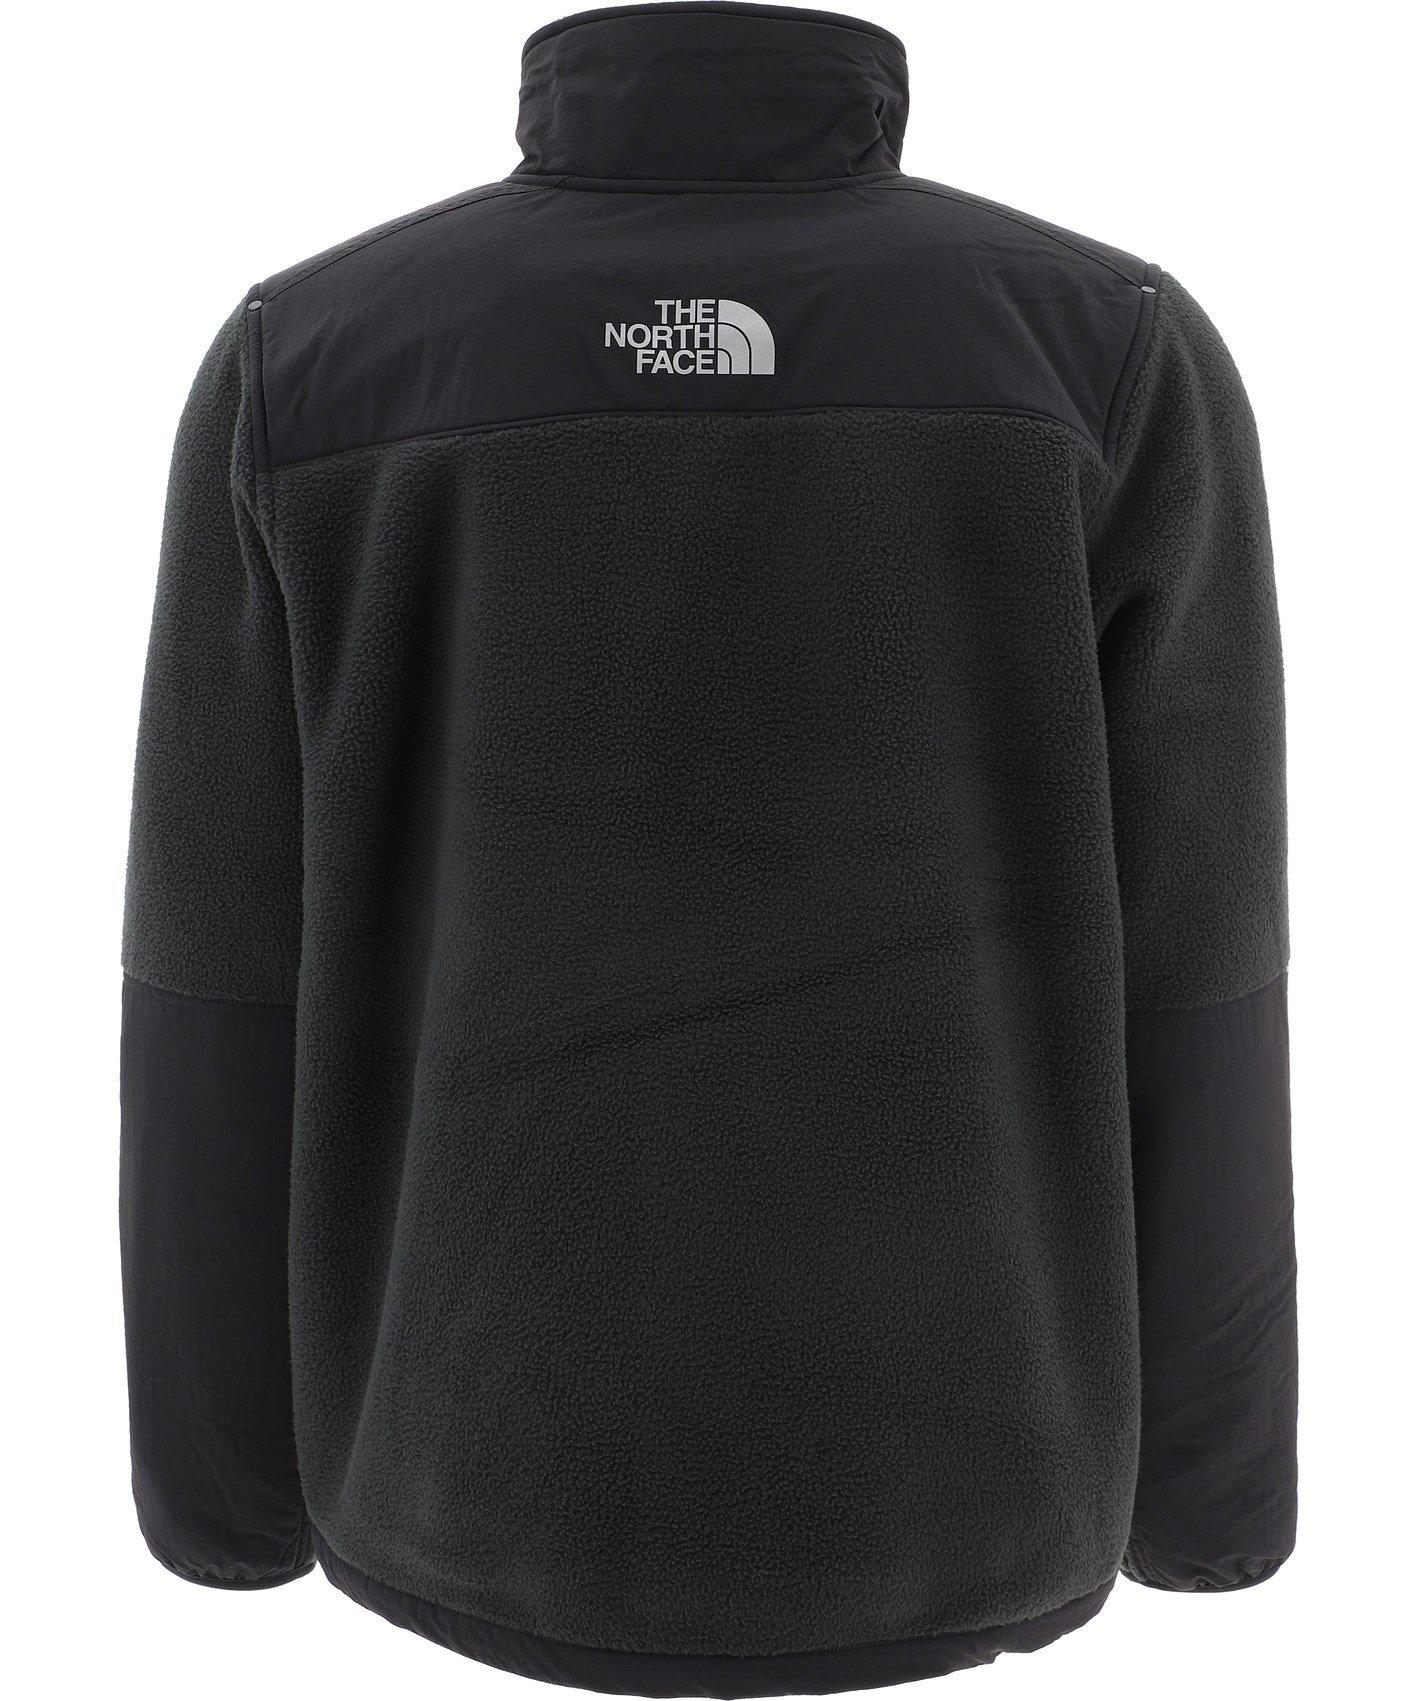 The North Face "steep Tech" Fleece Jacket in Black for Men - Save 13%